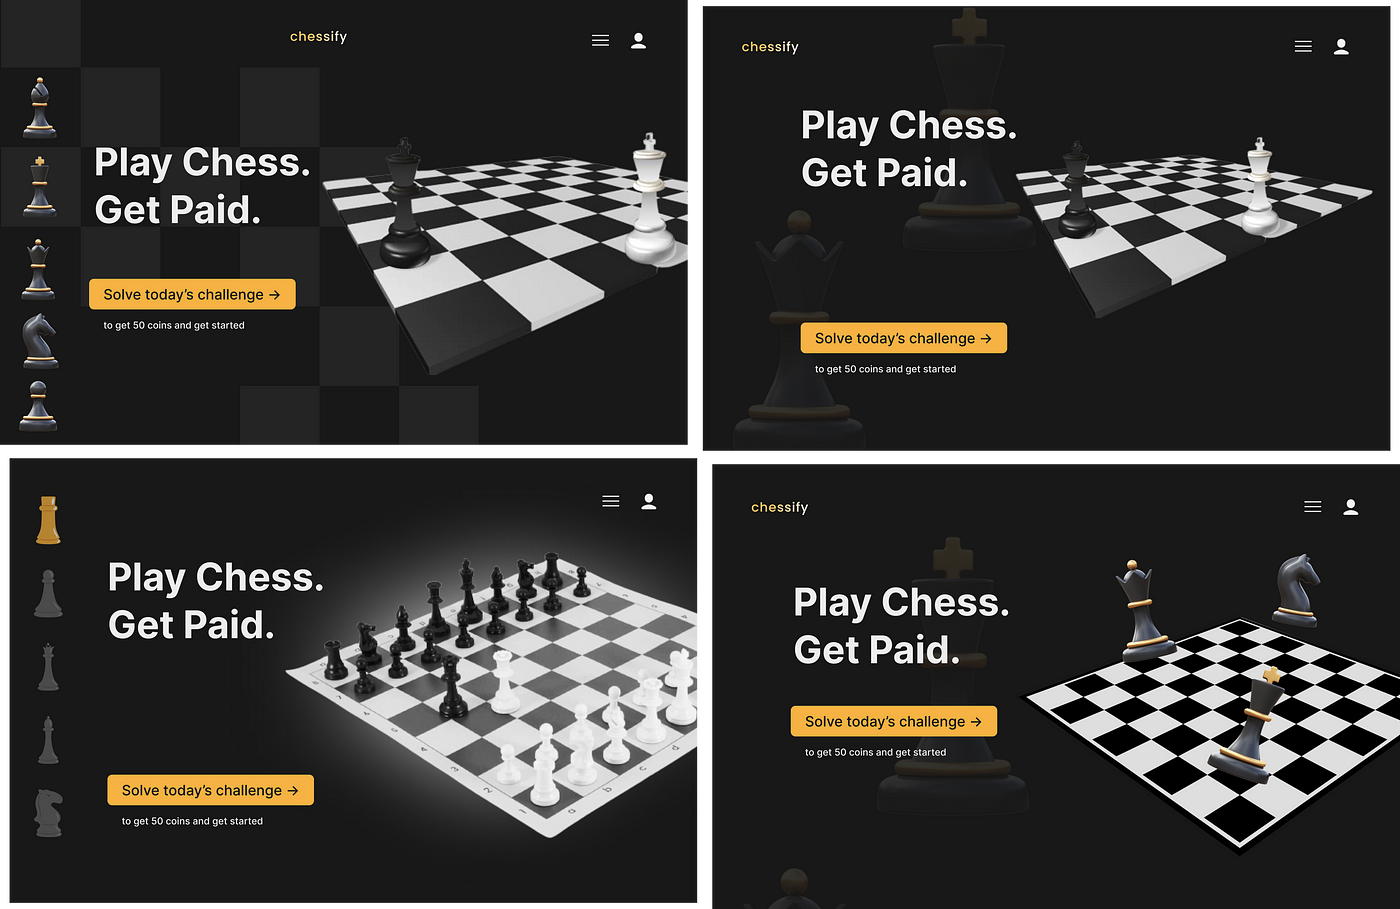 Immortal Game is building a web3 chess platform